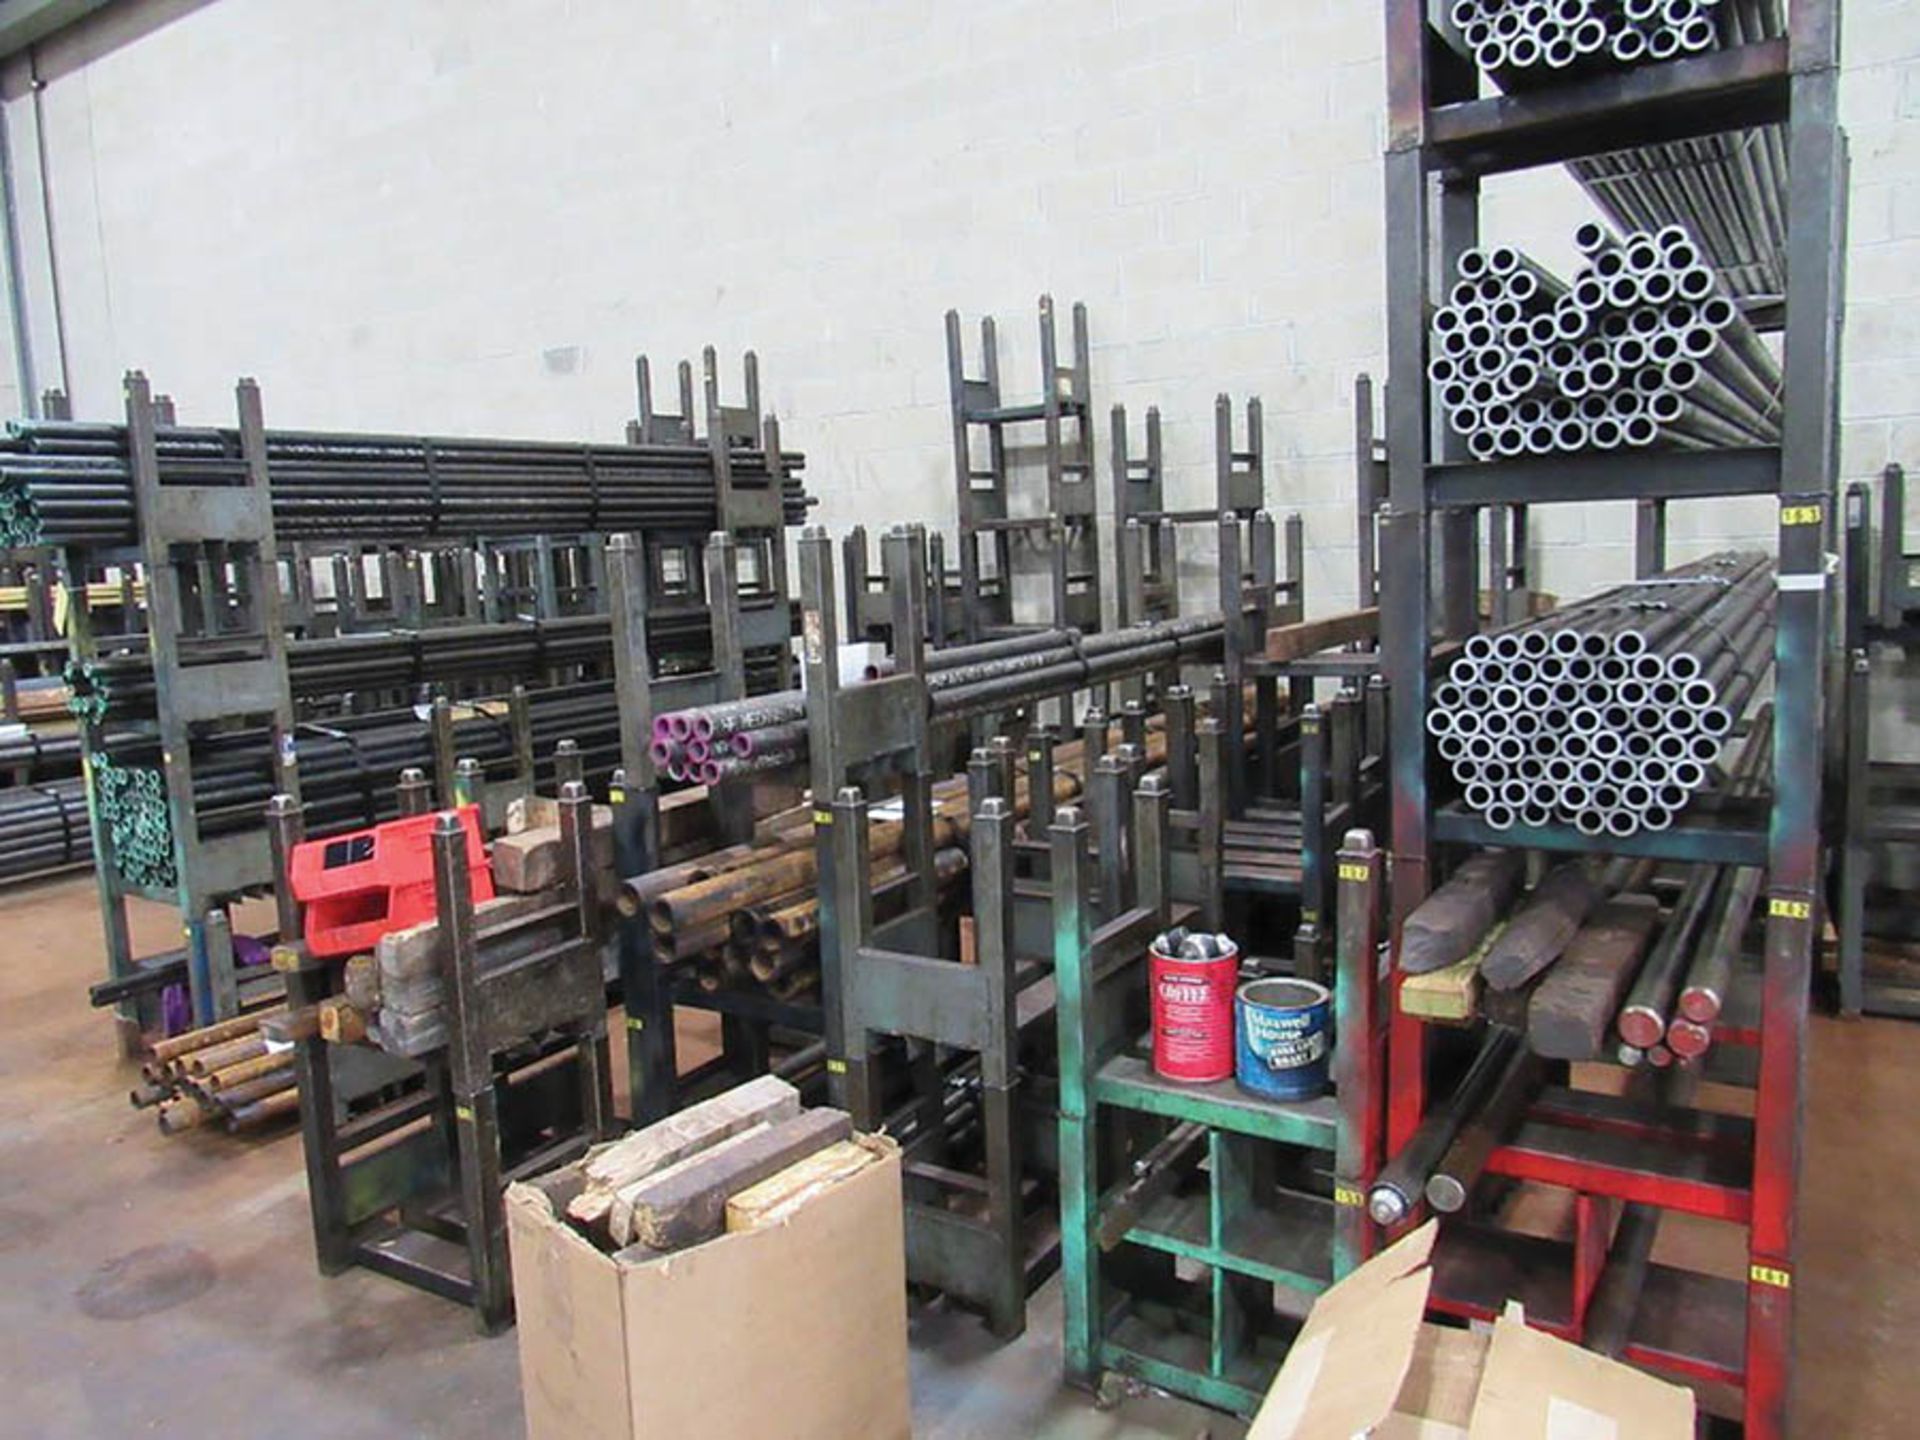 LARGE QUANTITY OF MATERIAL AND STACKABLE MATERIAL RACKS - Image 2 of 2